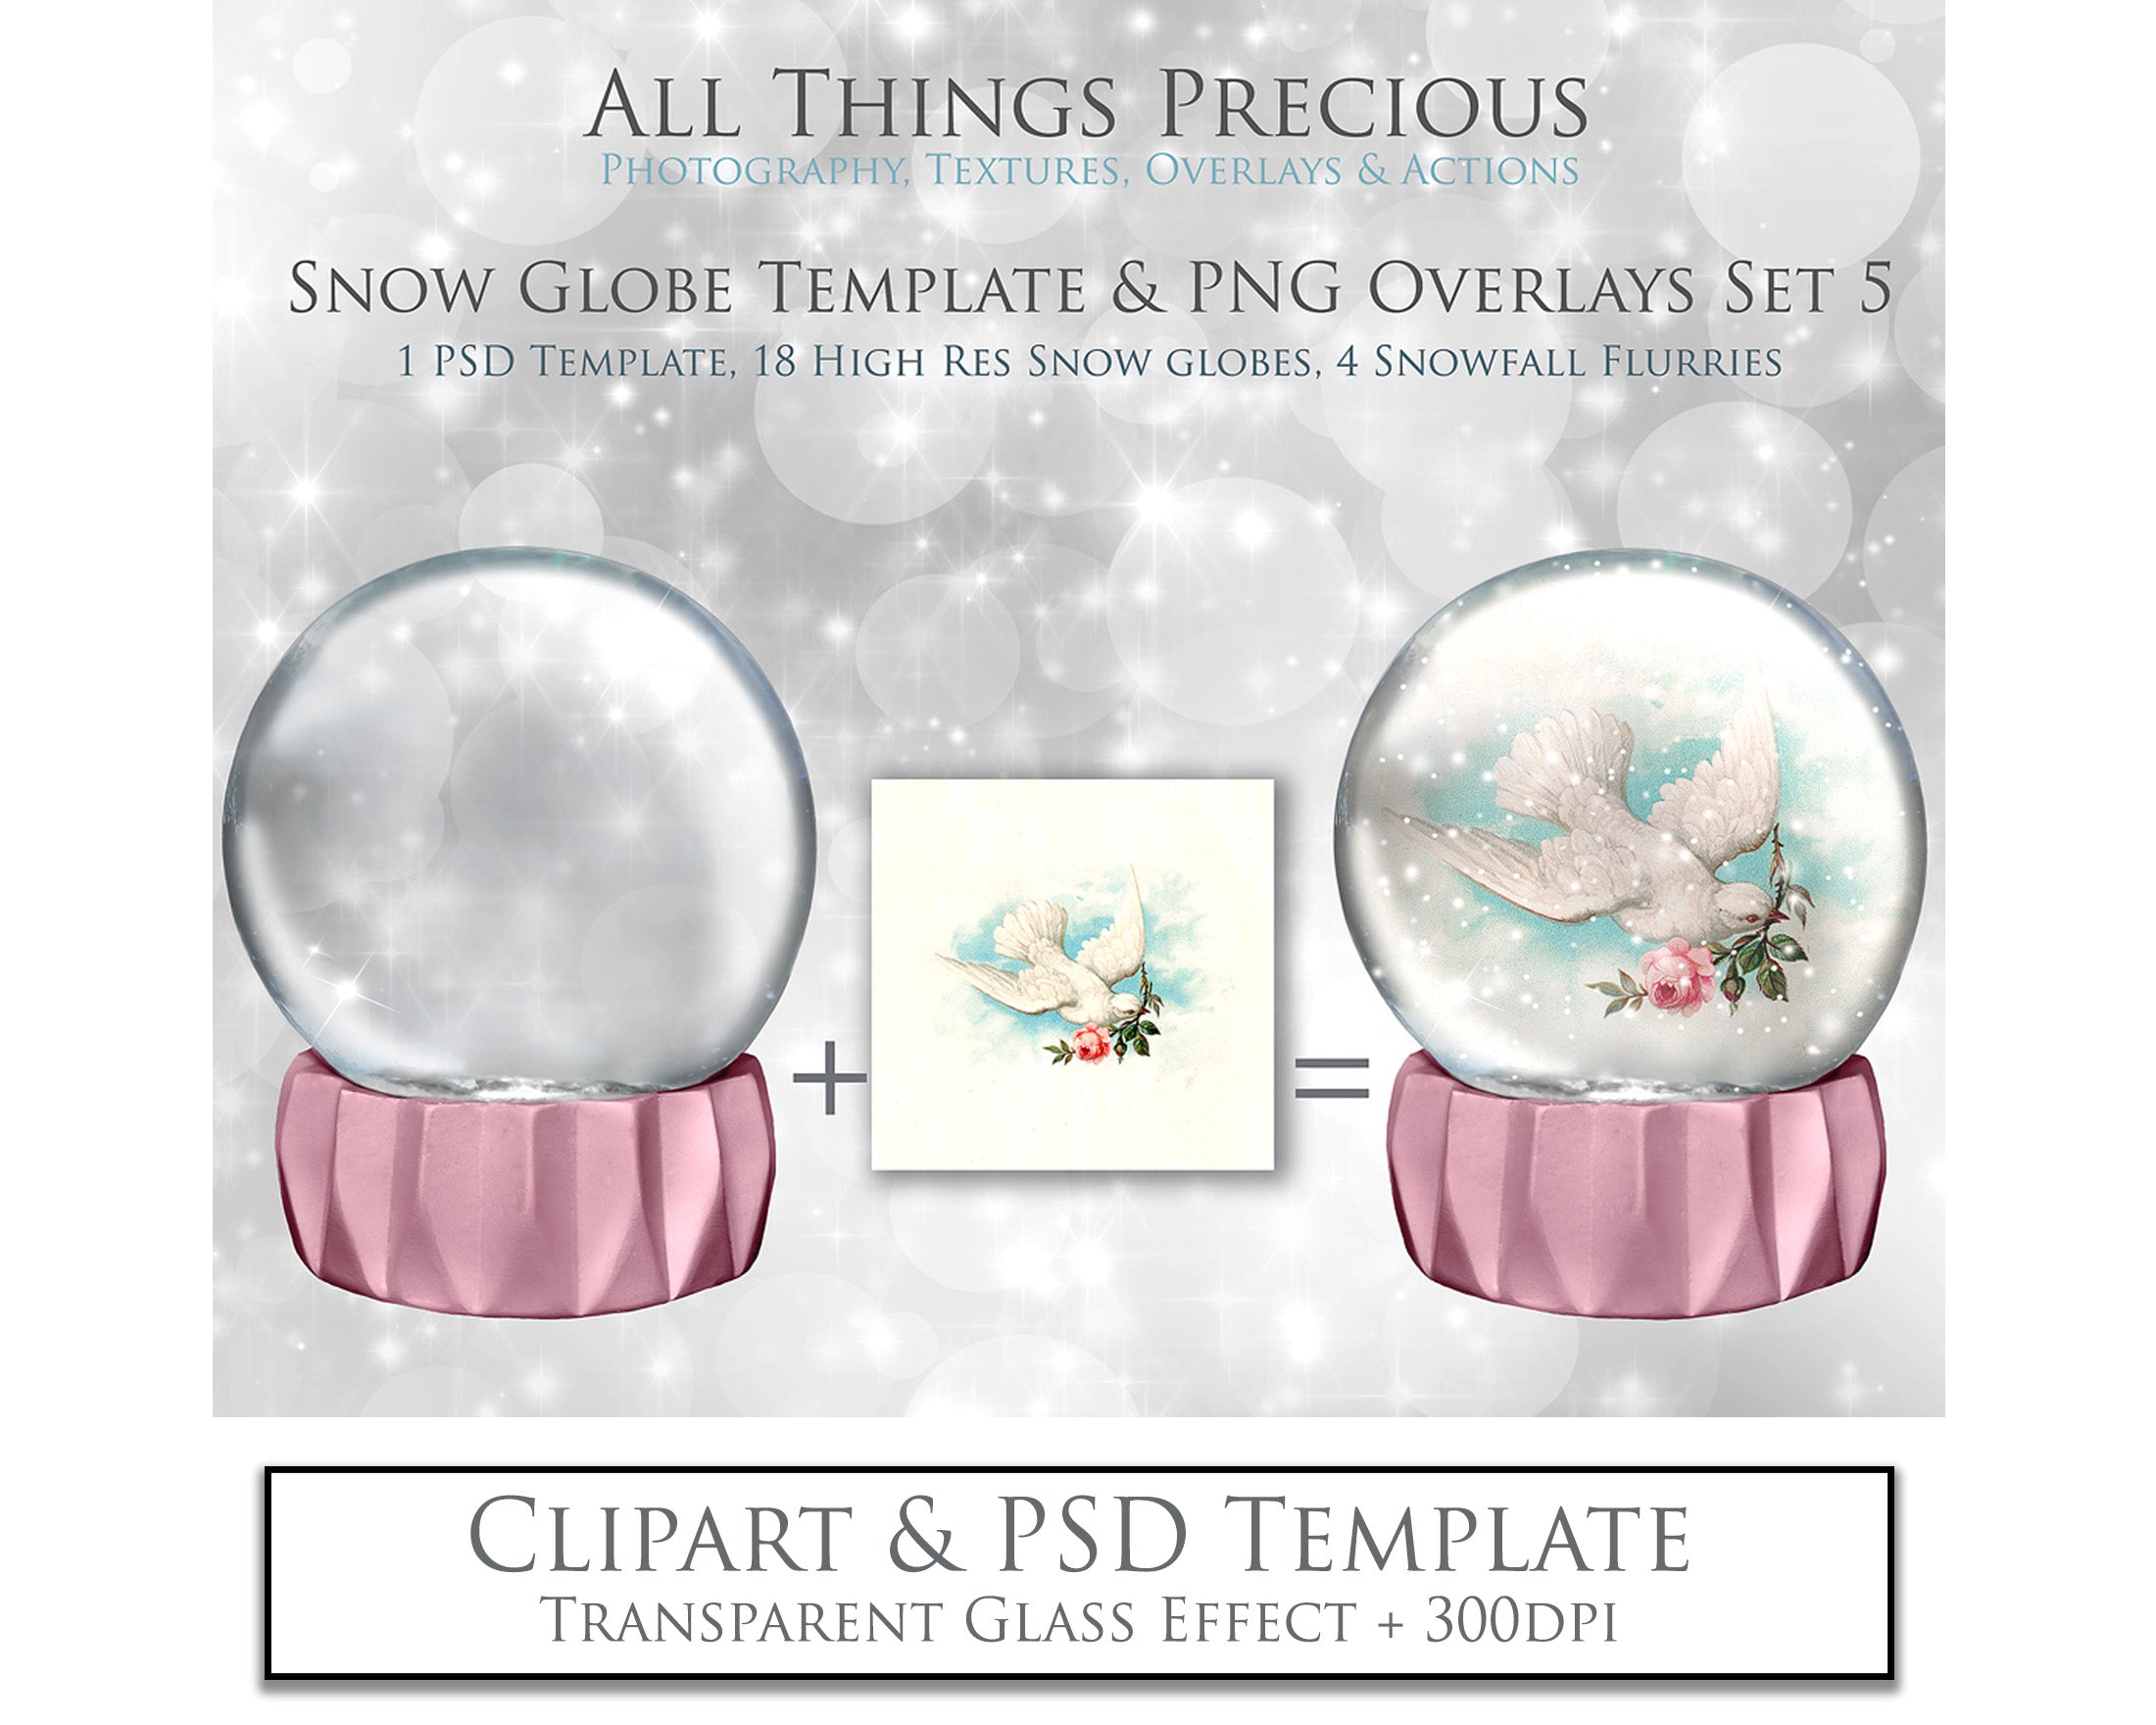 Digital Snow Globe Clipart with Overlays and a PSD Template included in the set.The globe is transparent, perfect to add your own images and retain the see through effect. Photoshop Photography Background. Printable, Editable for Christmas with Frozen Winter Theme. Clear Glass graphic effects. ATP Textures